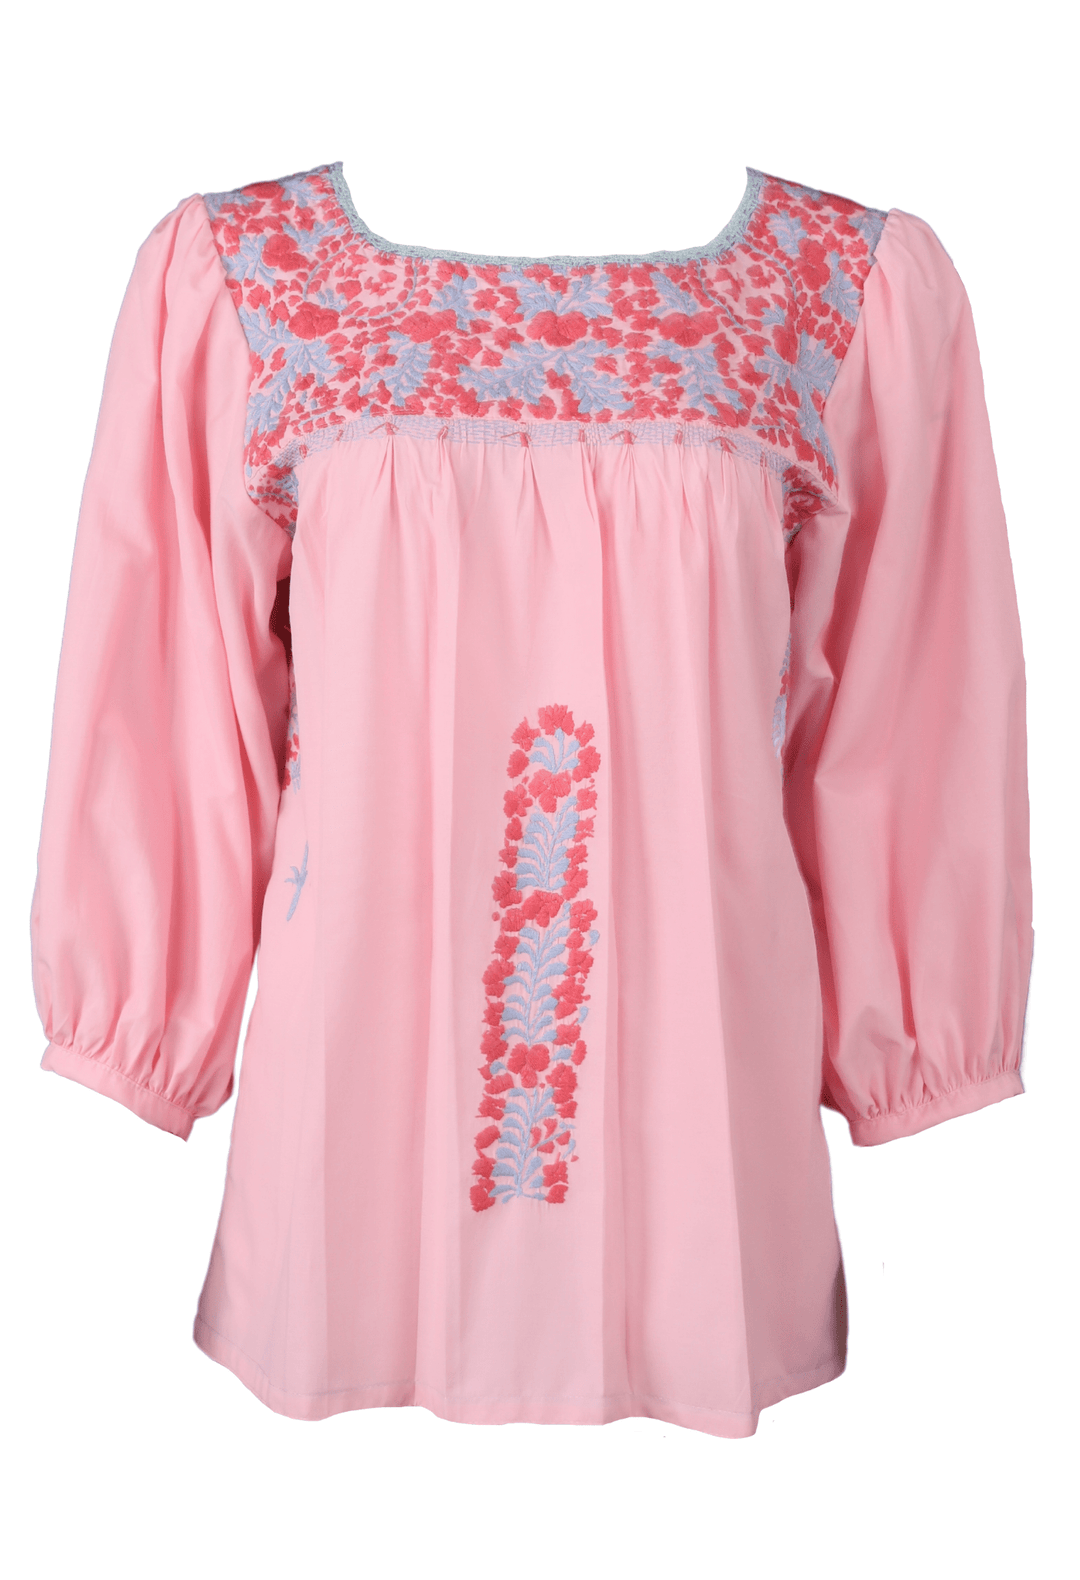 Catalina Blouse Blouse Catalina Chica Coral y Celeste